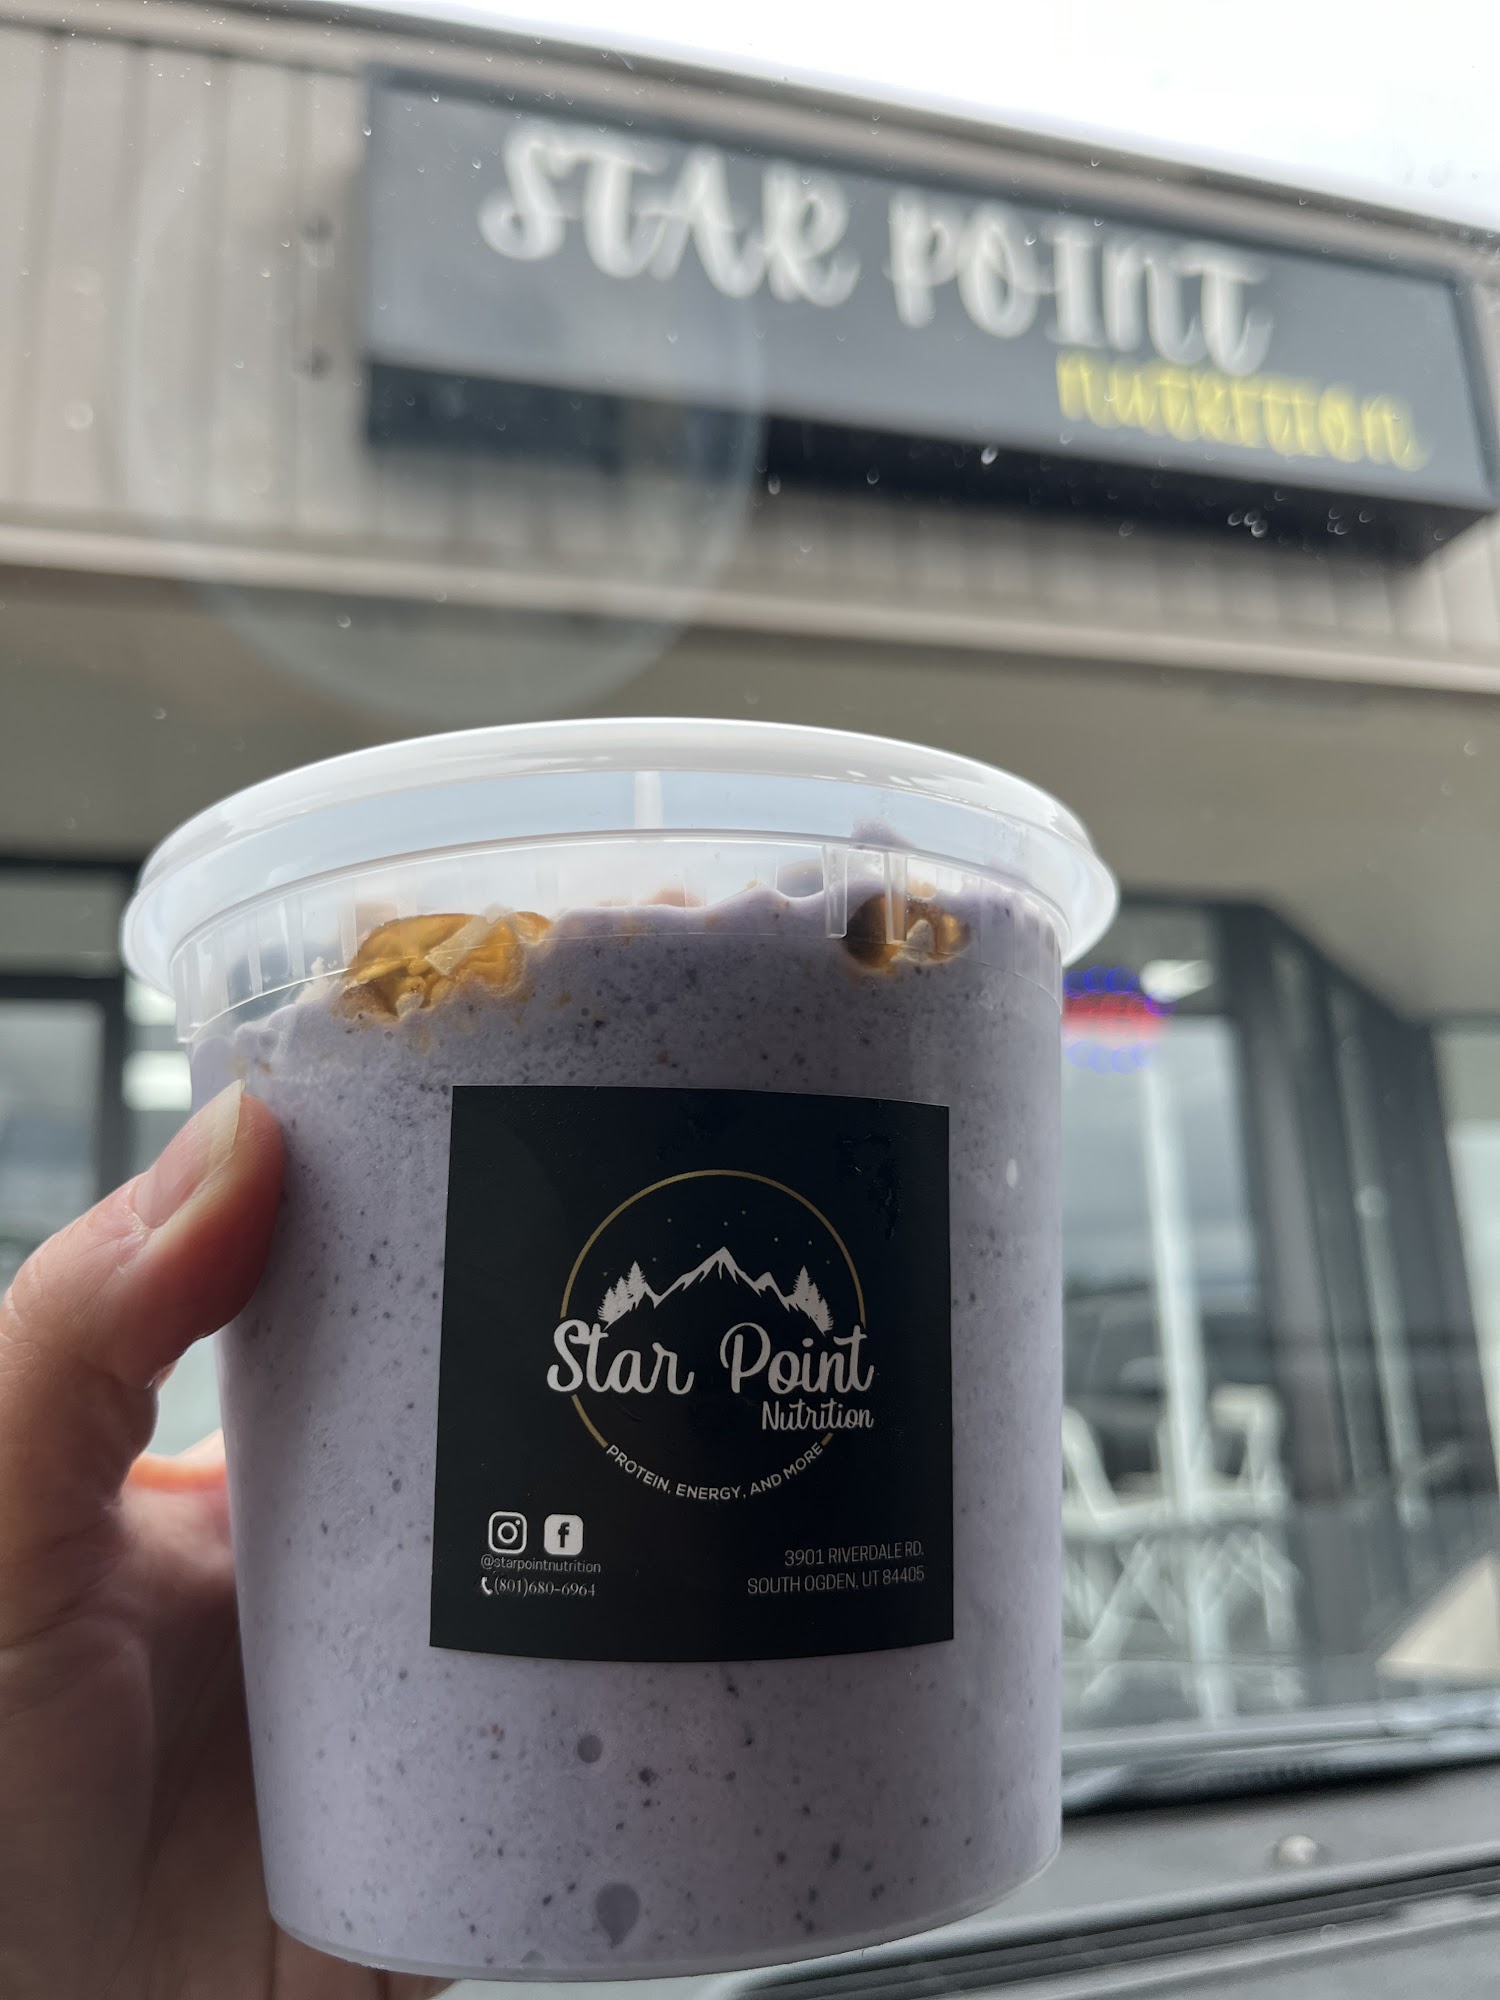 Star Point Nutrition